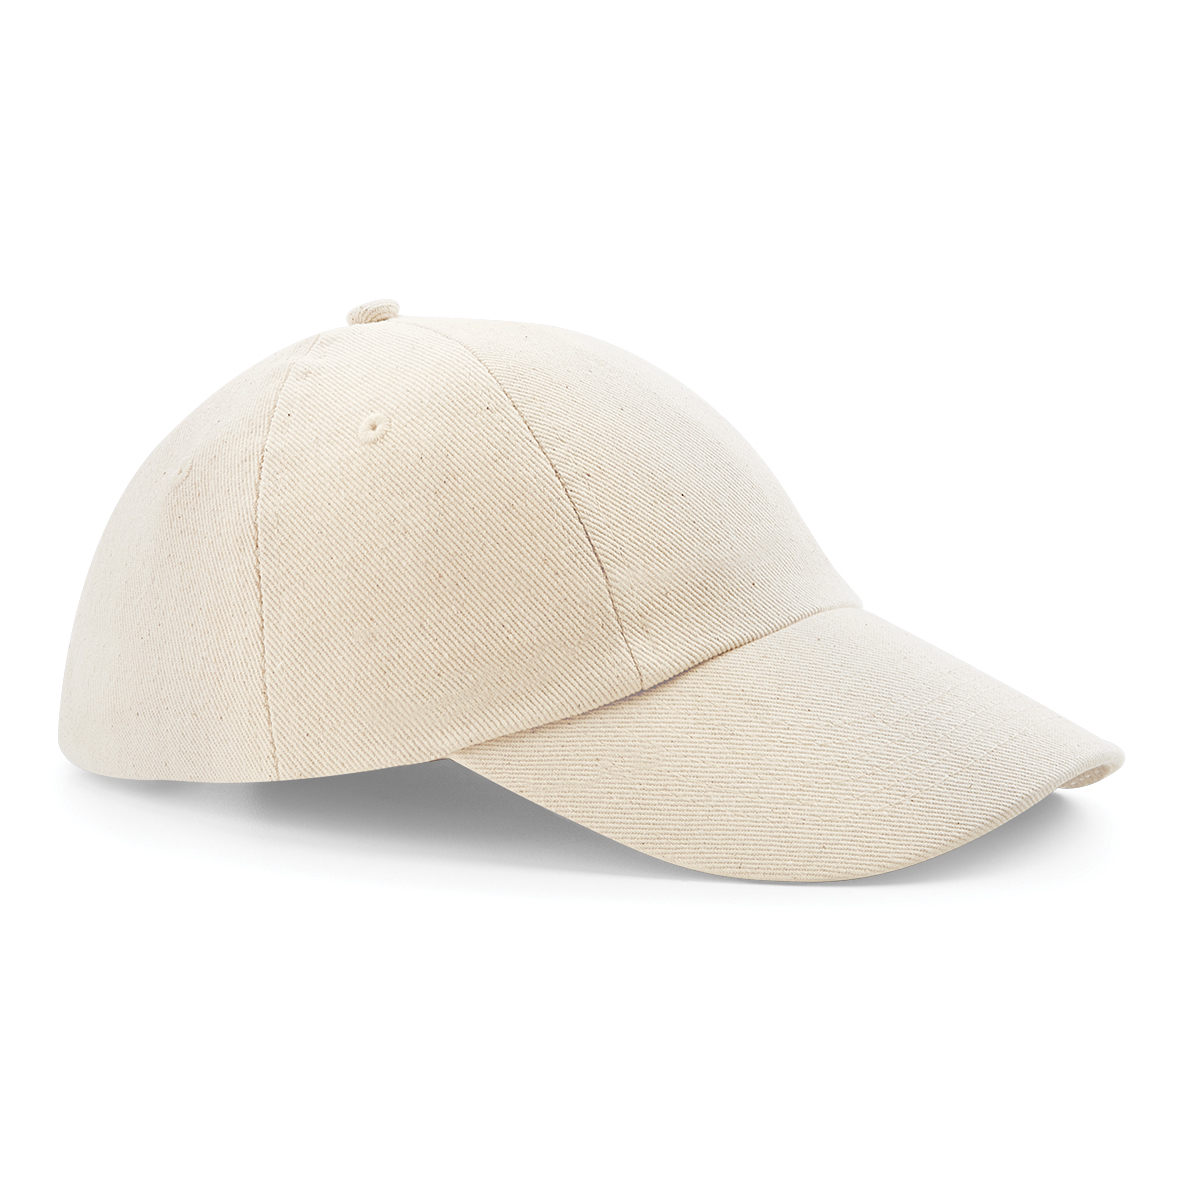 Low Profile Cap in beige with seamless, centralised front panel